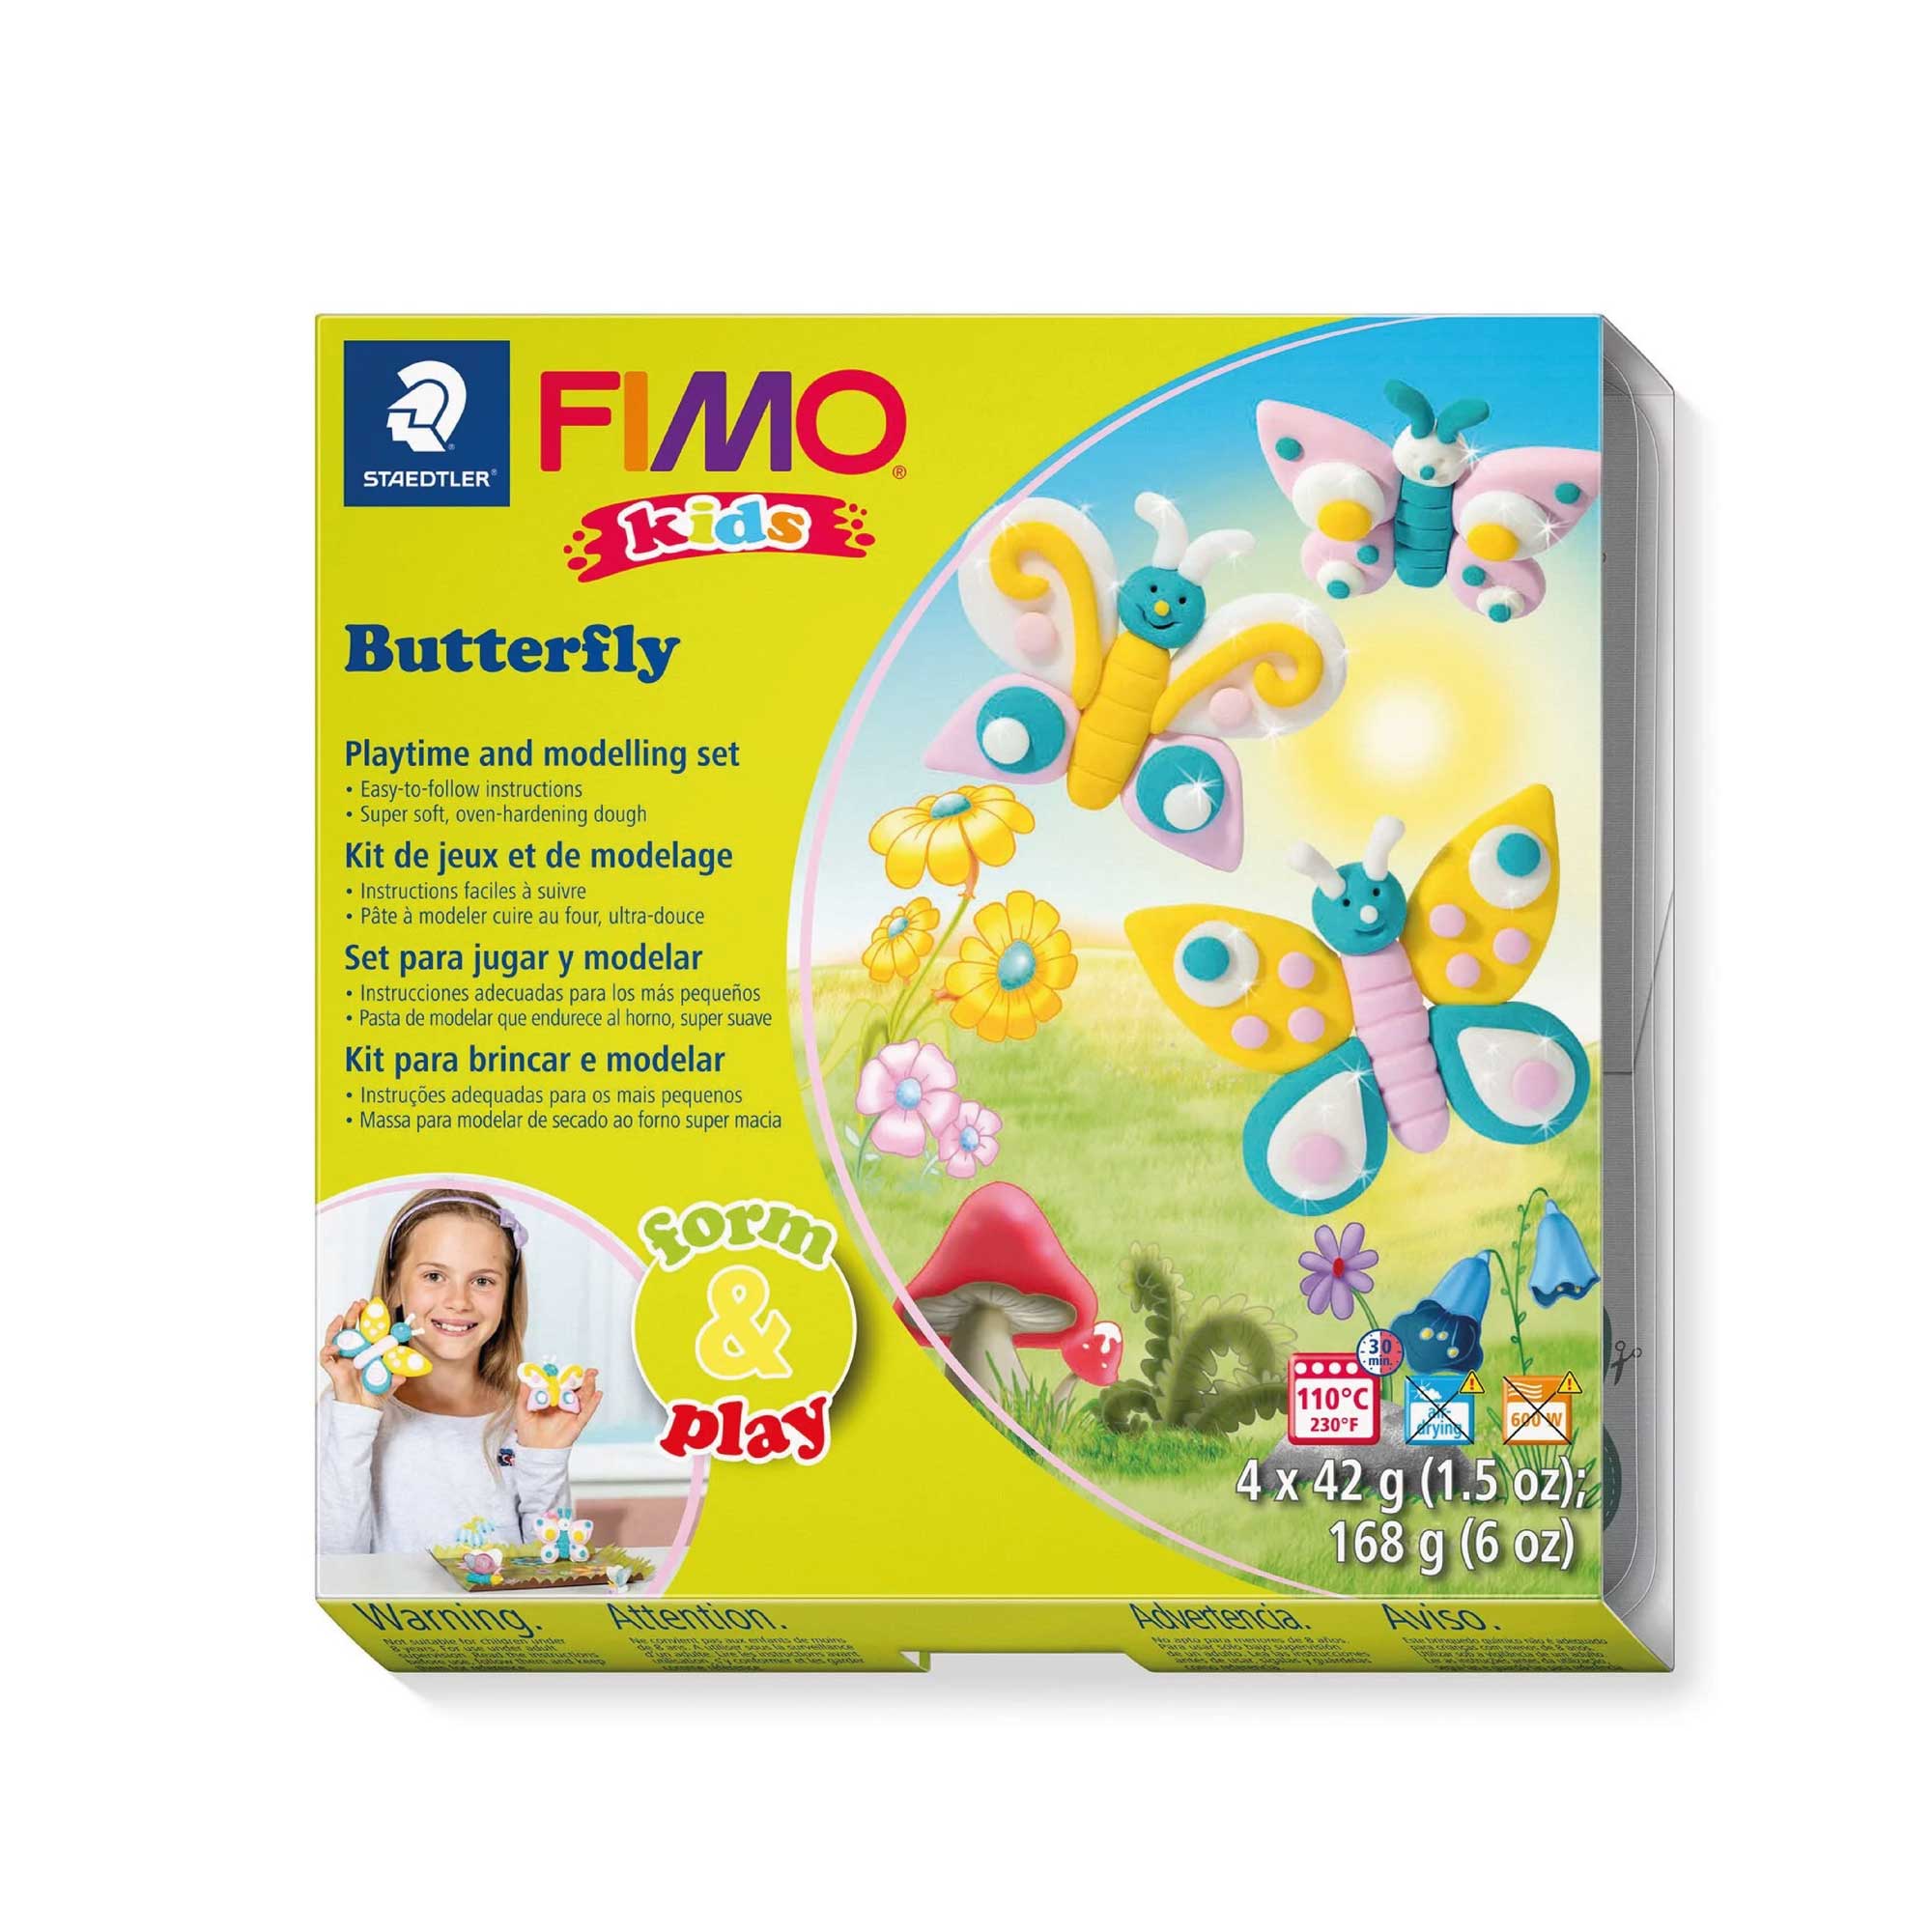 Staedtler FIMO Kids Form and Play Set - Butterfly - Box